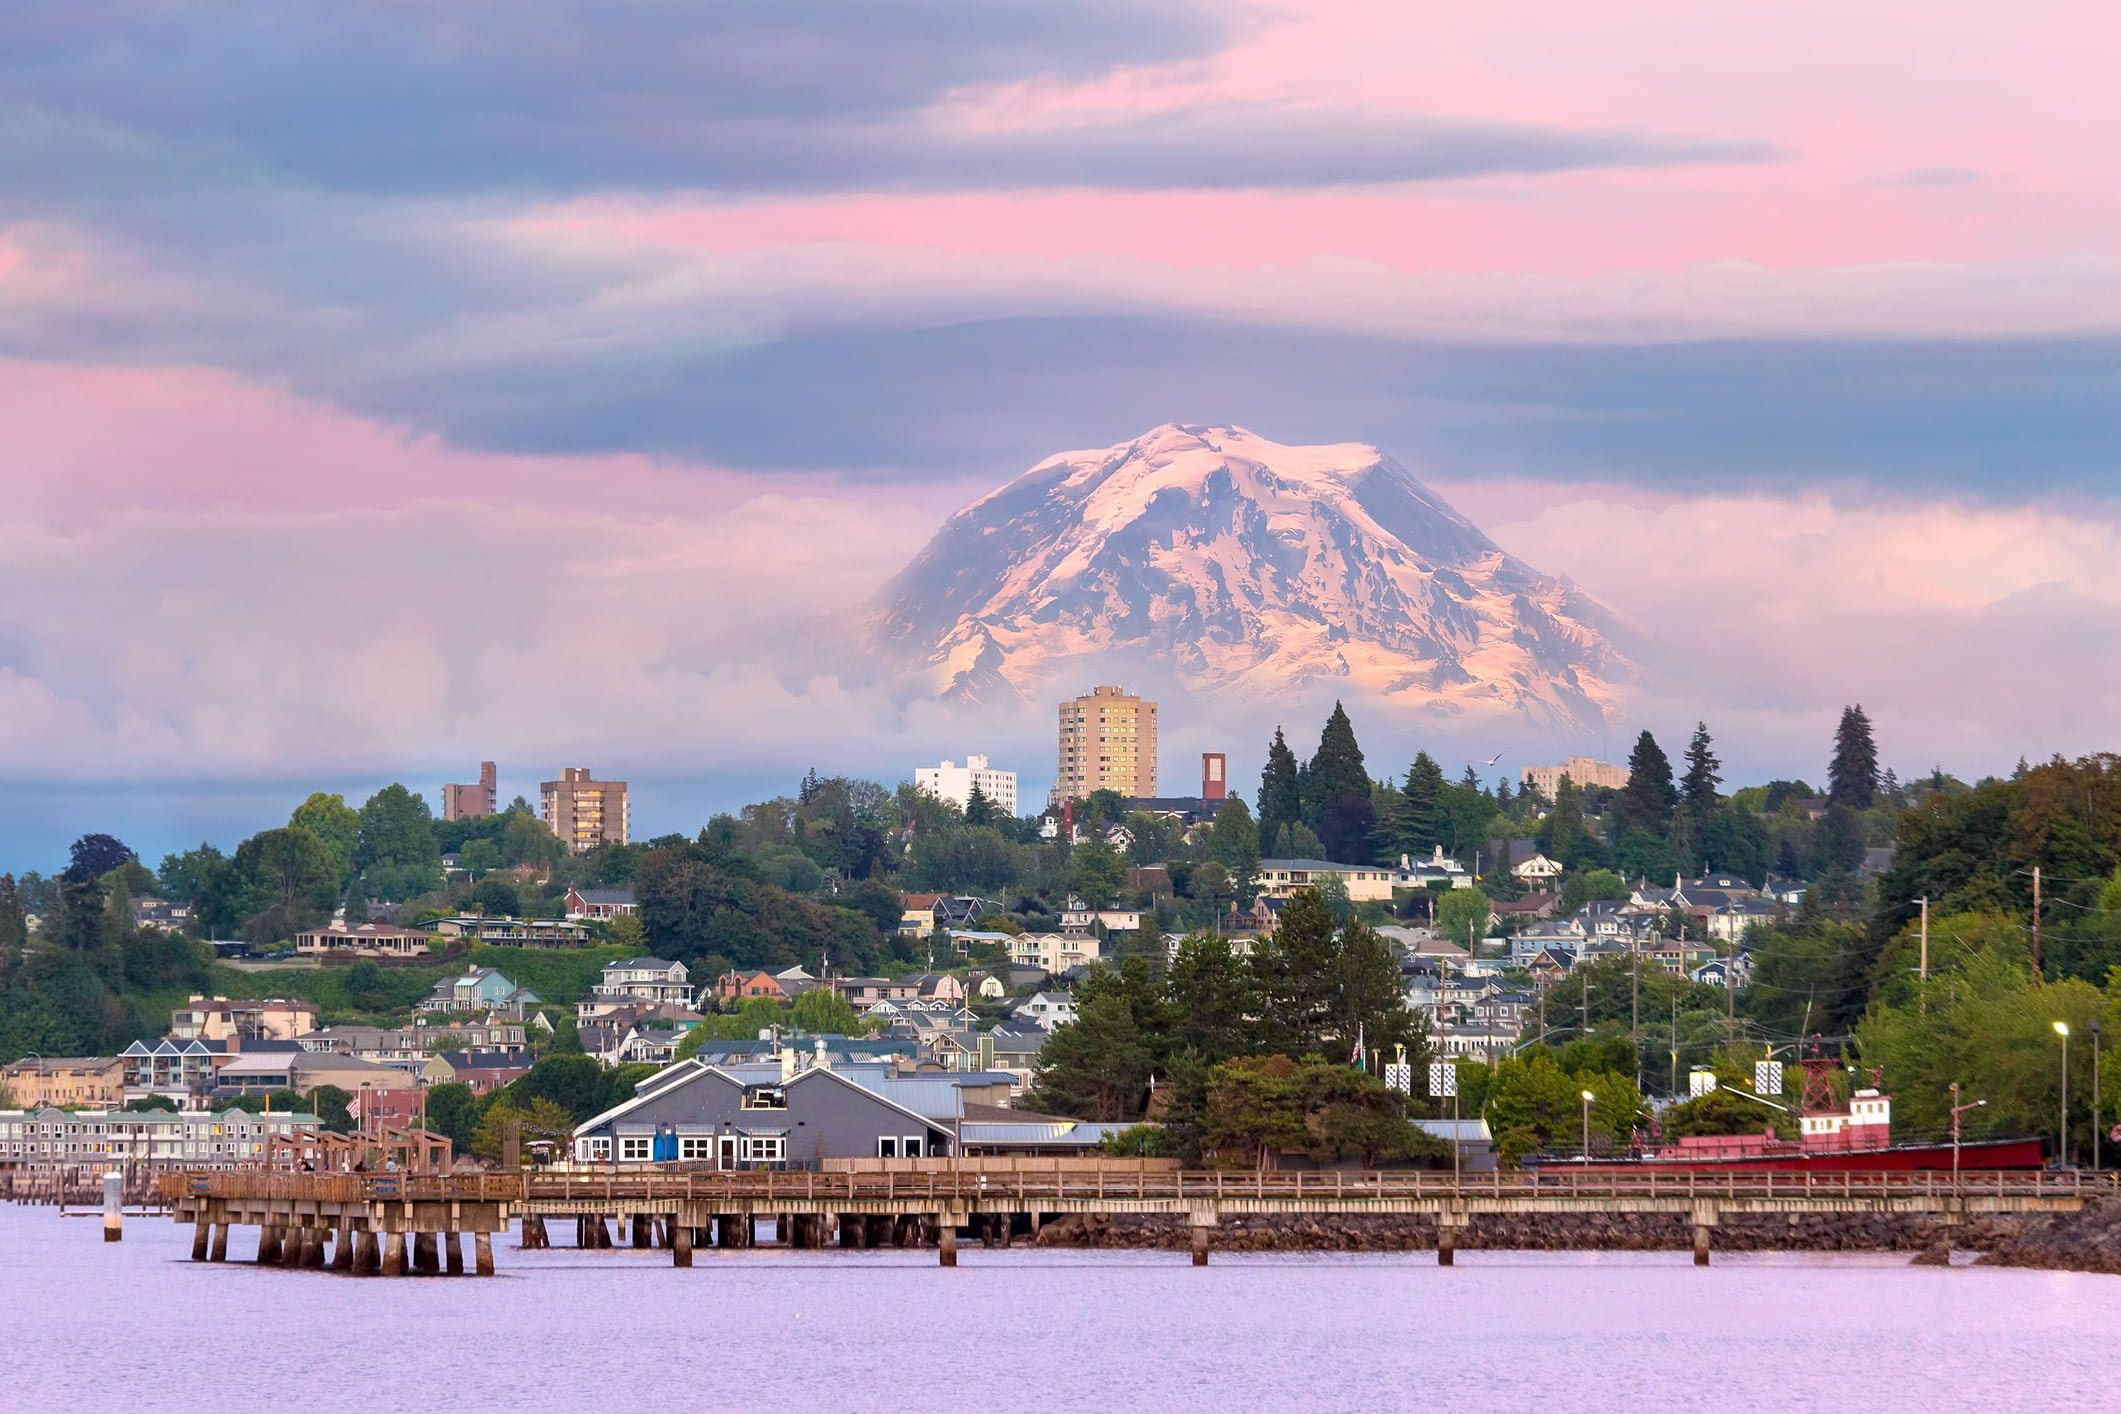 Mount Rainier over Tacoma WA waterfront during alpenglow sunset evening